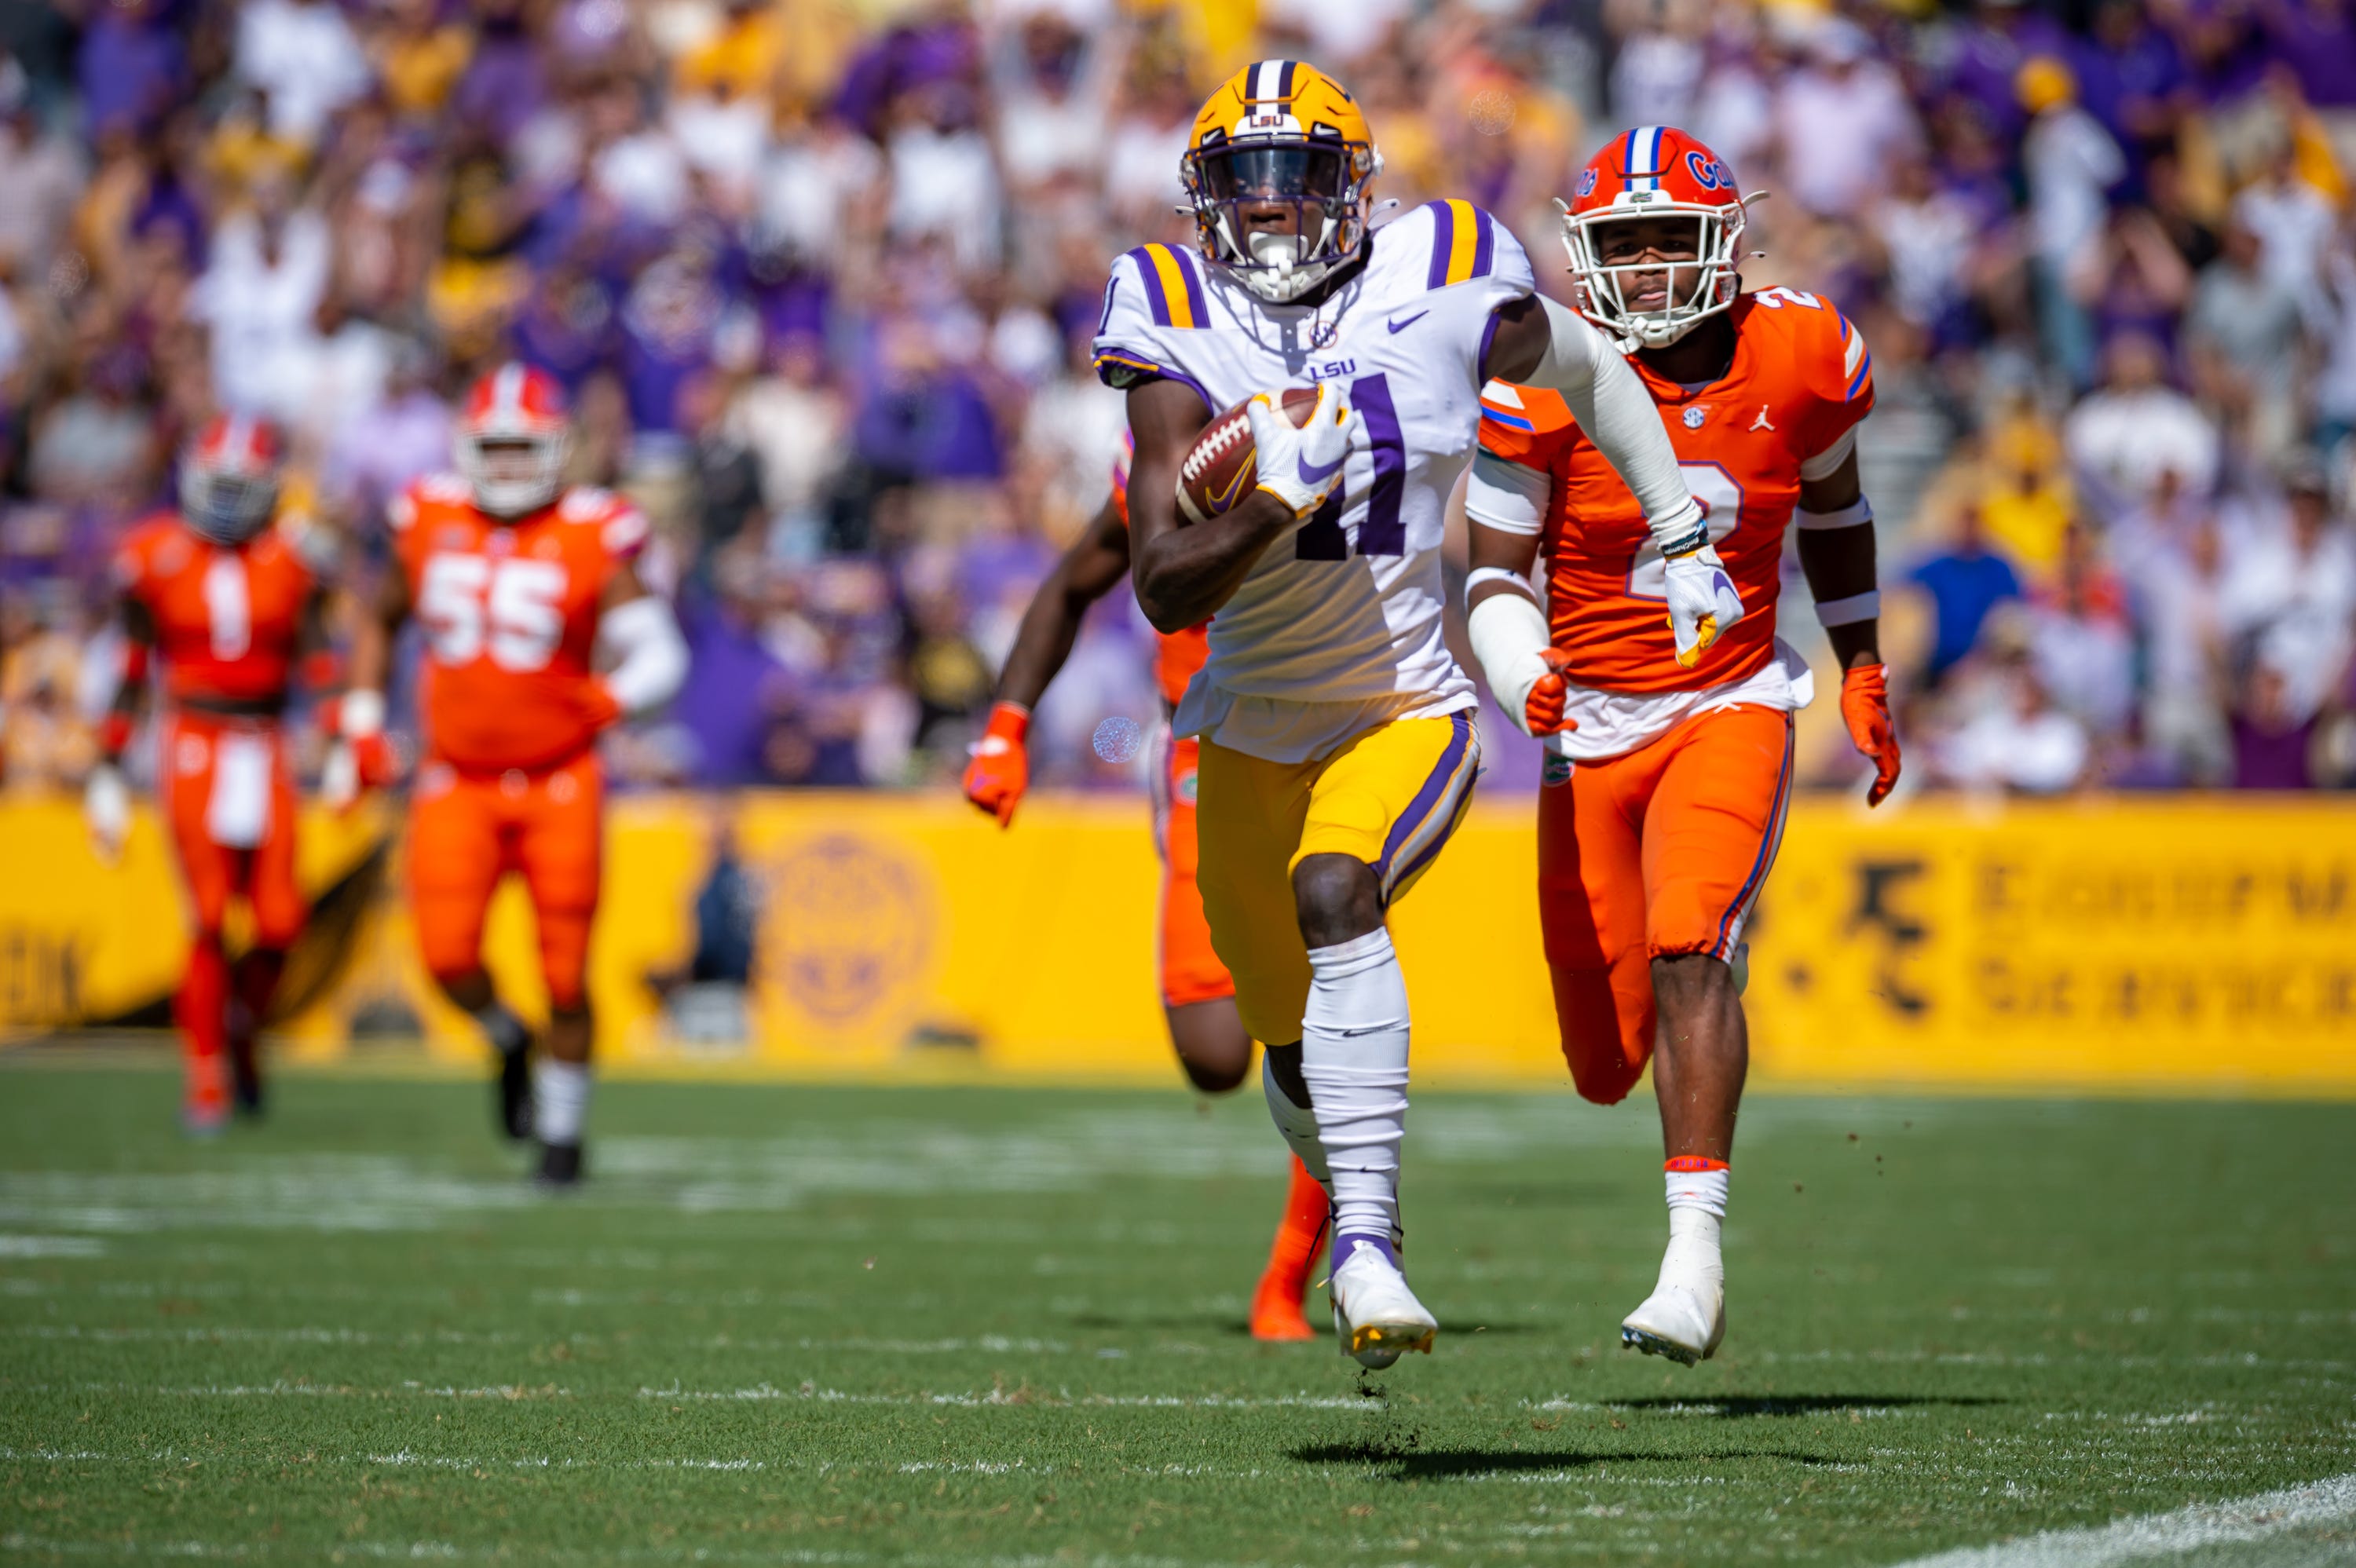 How to watch LSU Tigers football vs. No. 12 Ole Miss on TV, live stream